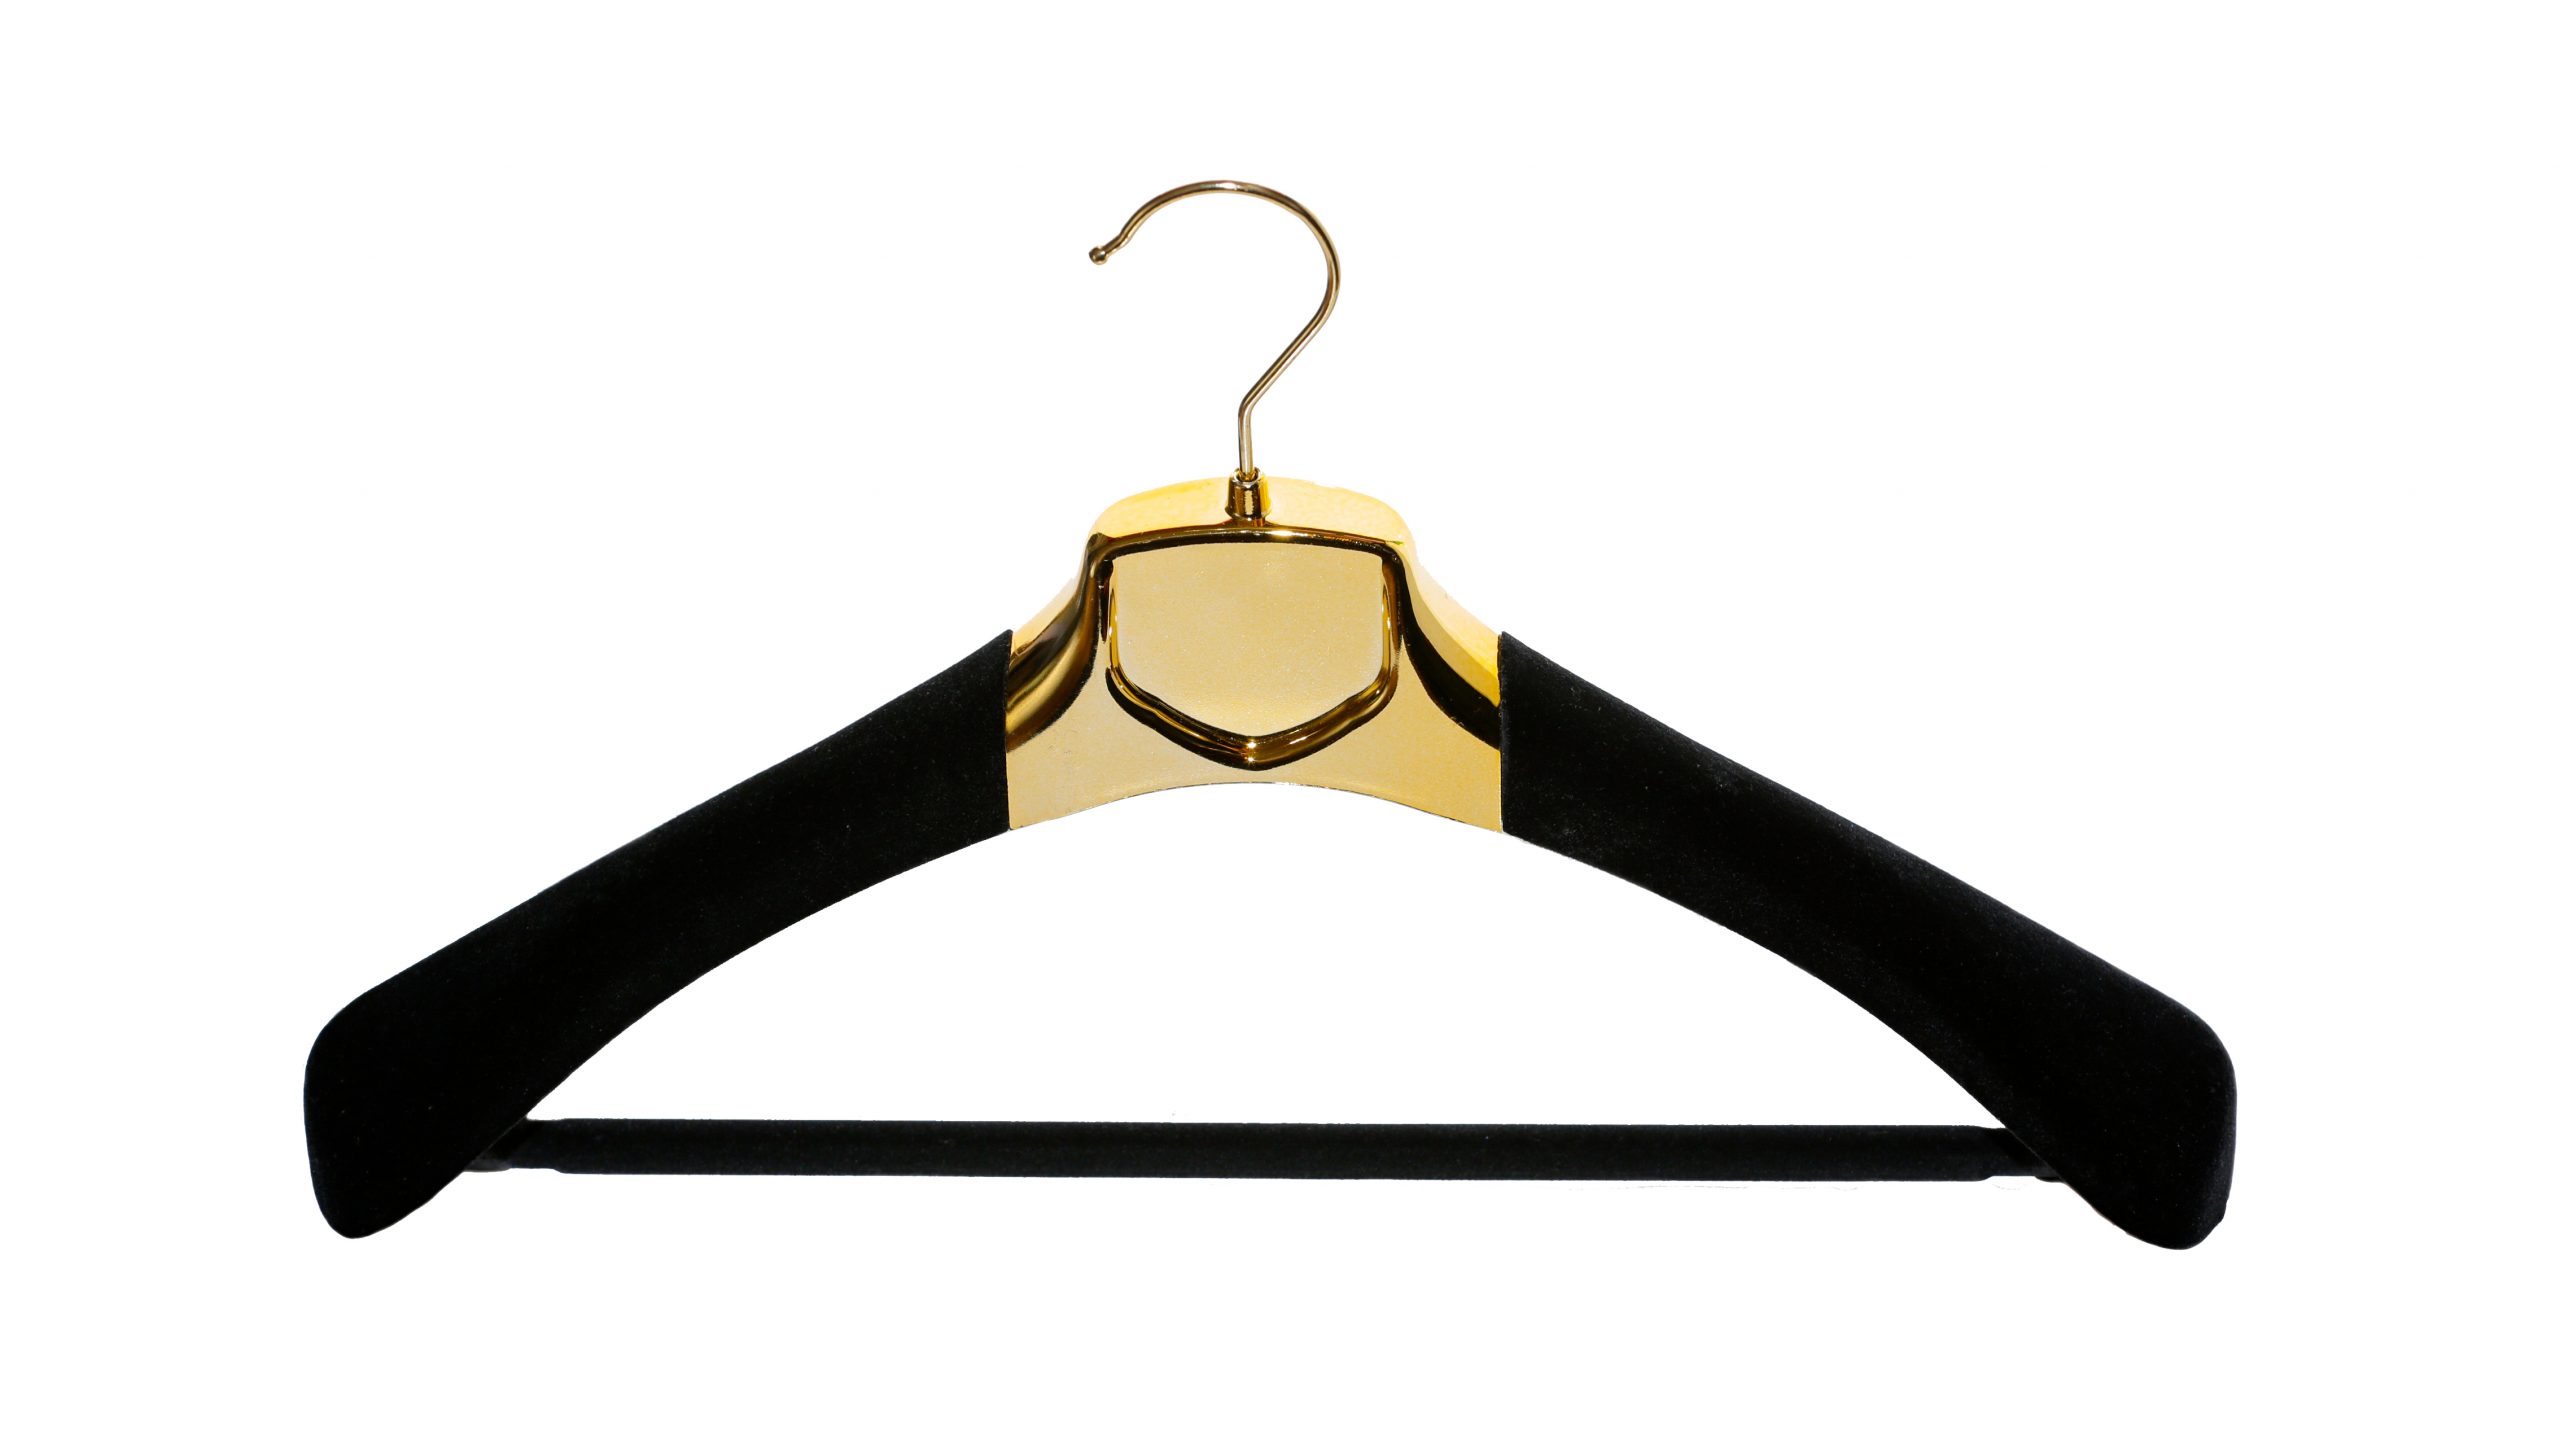 https://clothes-hangers.com/wp-content/uploads/2020/09/Velvet-Gold-and-Black-Hangers-with-Trouser-Bar-2-2-scaled.jpg